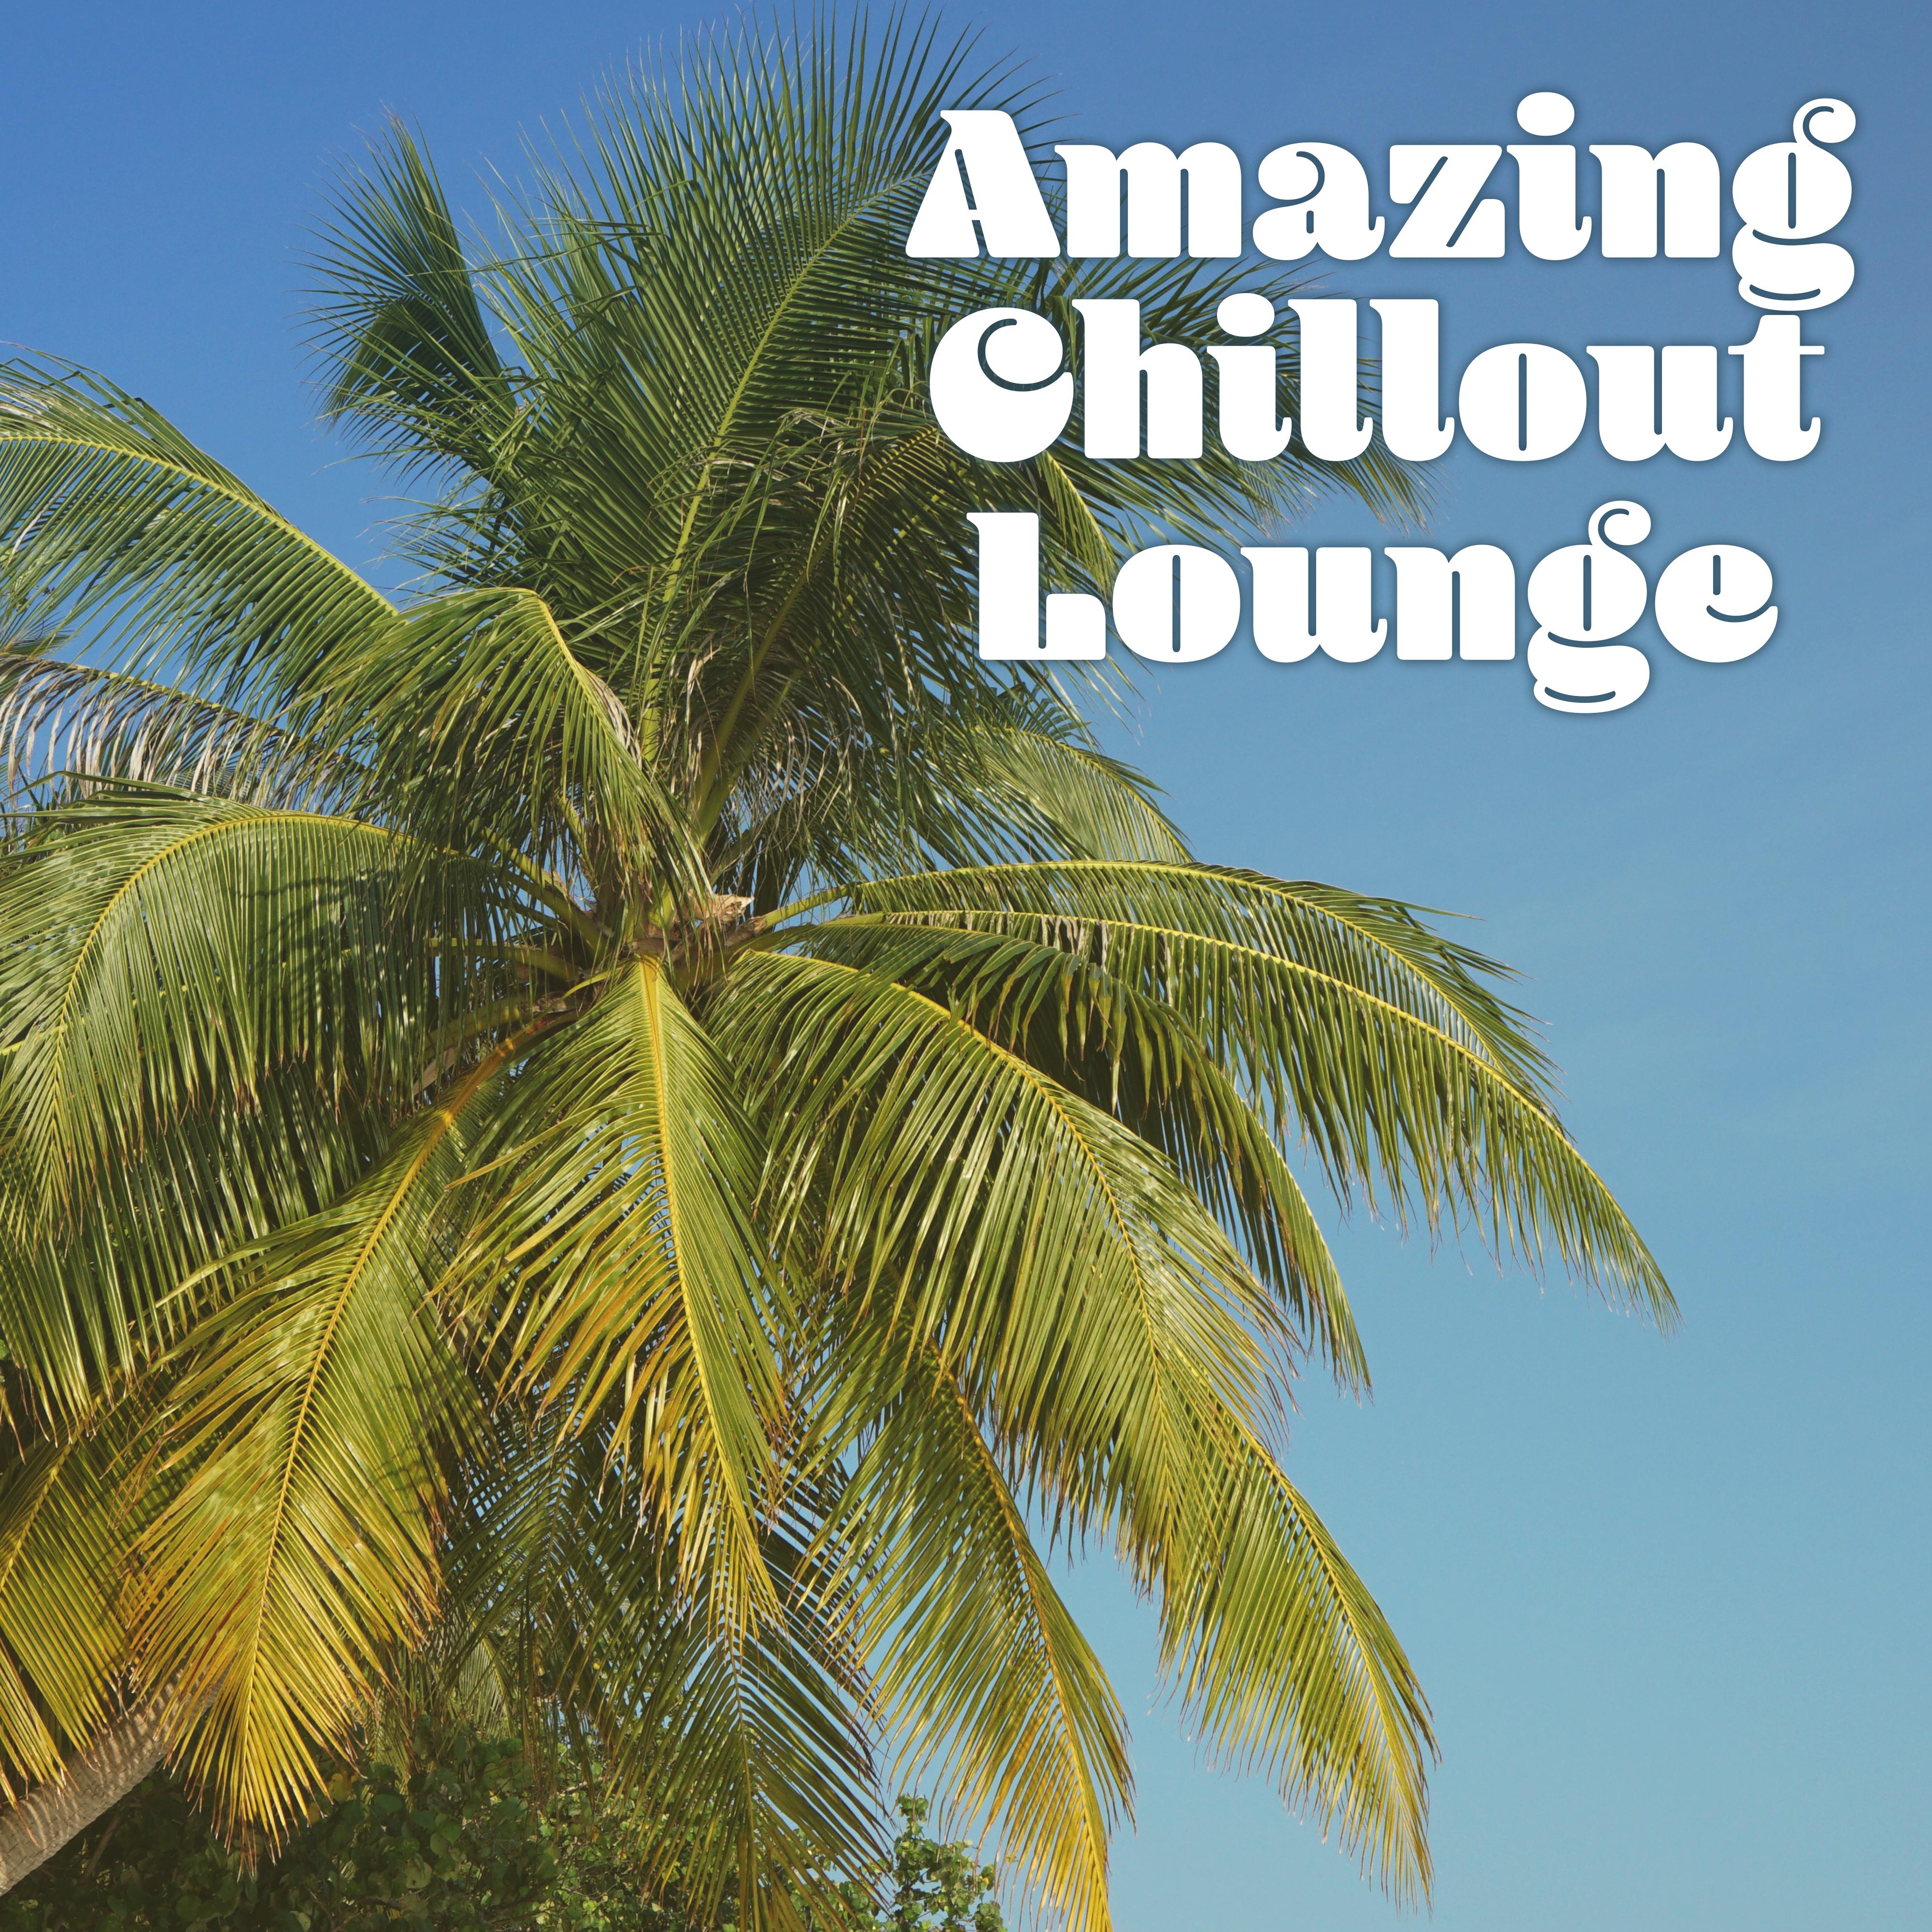 Amazing Chillout Lounge – Ambient Electronic Music, Chillout Music for Party, Enjoy Yourself, Party Holiday Music